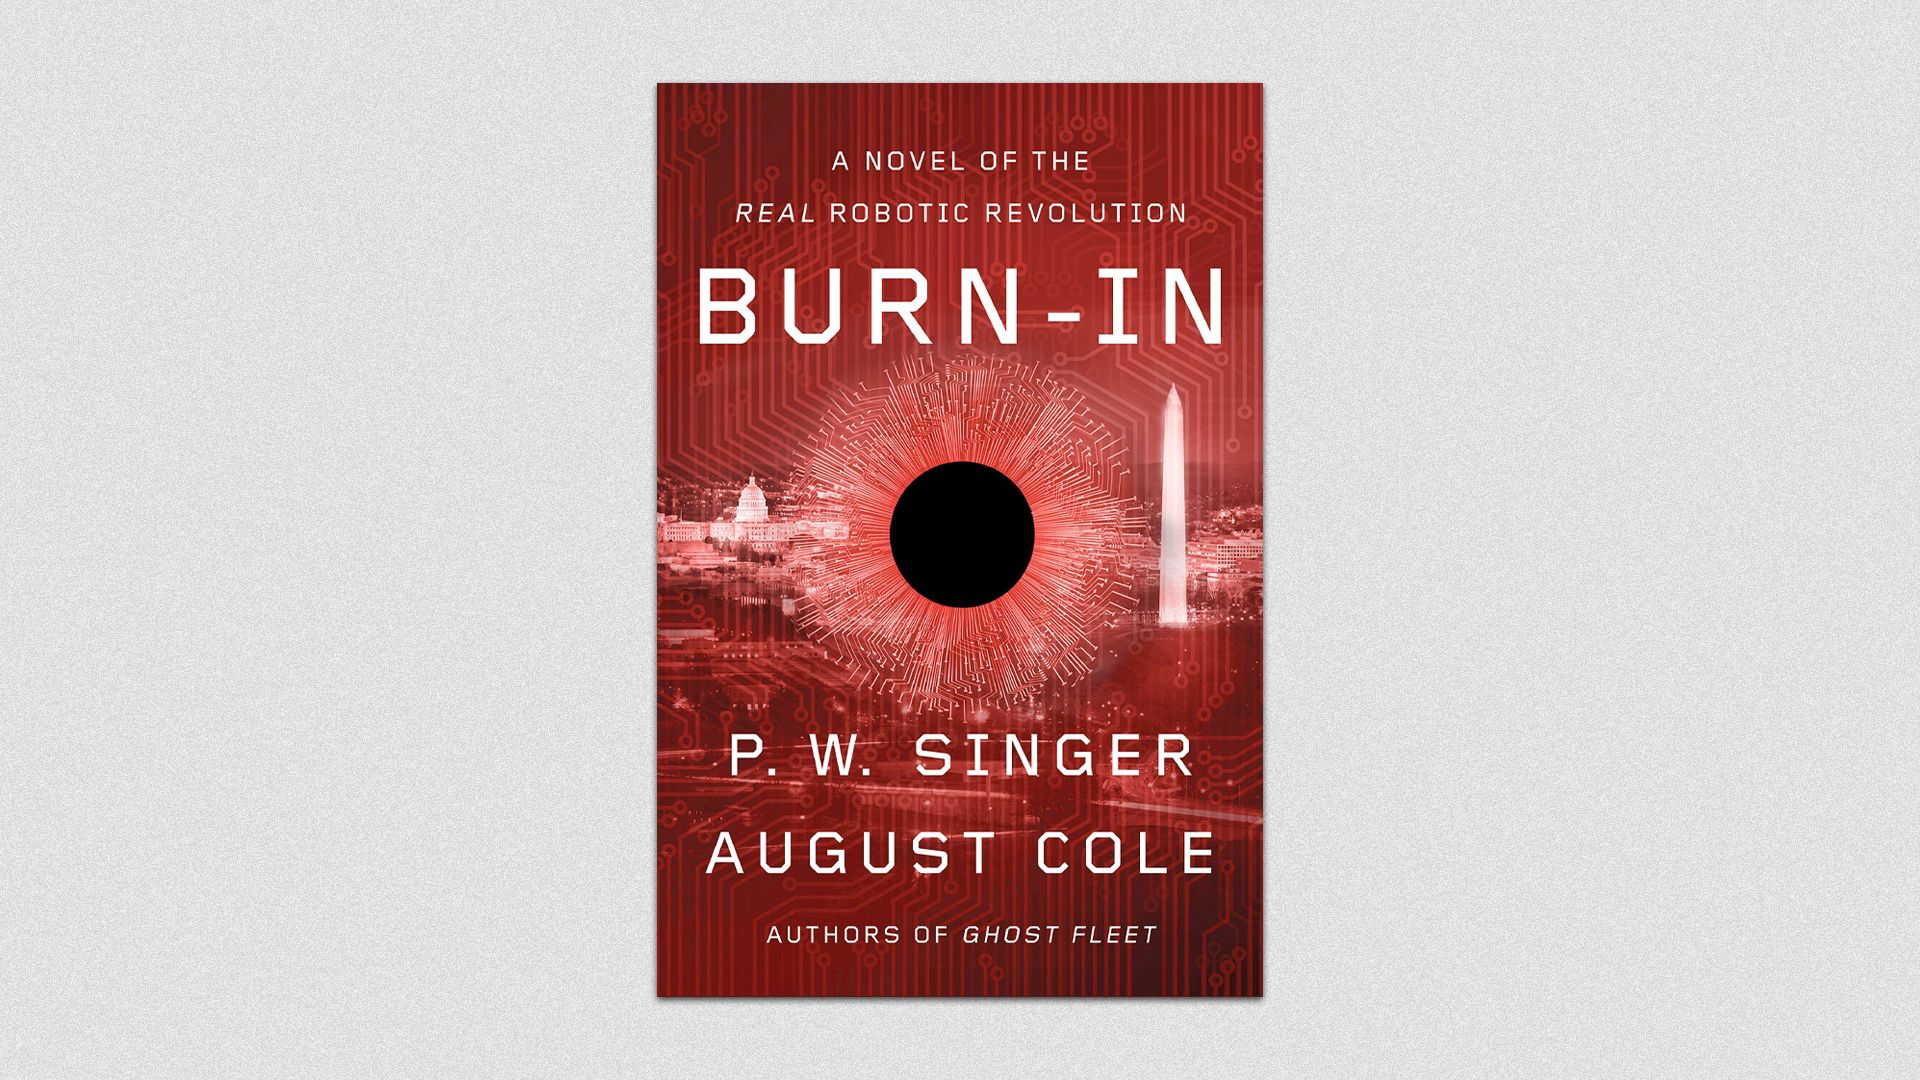 Photo of the cover of the novel "Burn-In"